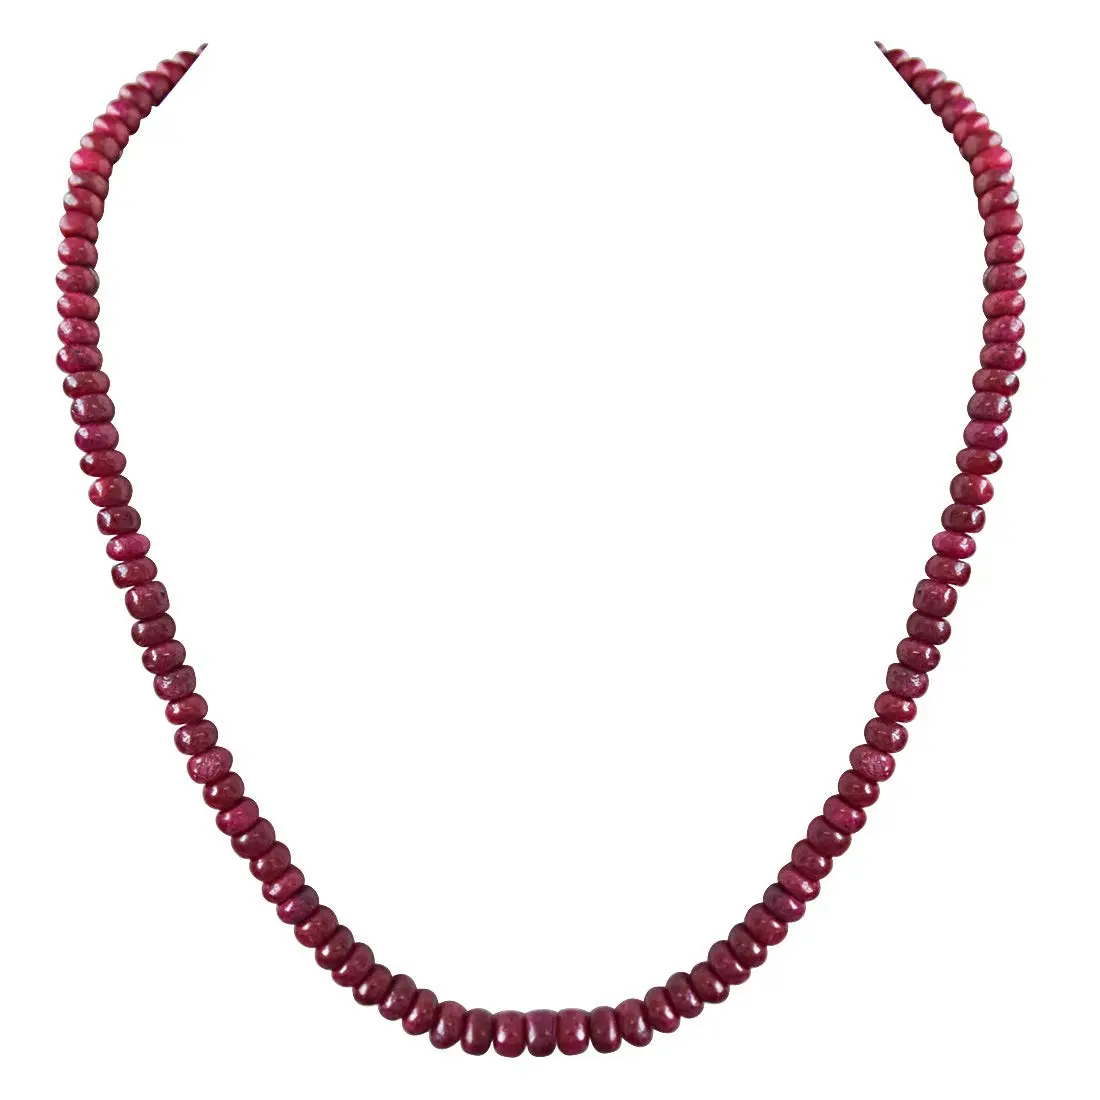 283cts Single Line Real Maroon Red Ruby Beads Necklace for Women (283ctsRubyNeck)